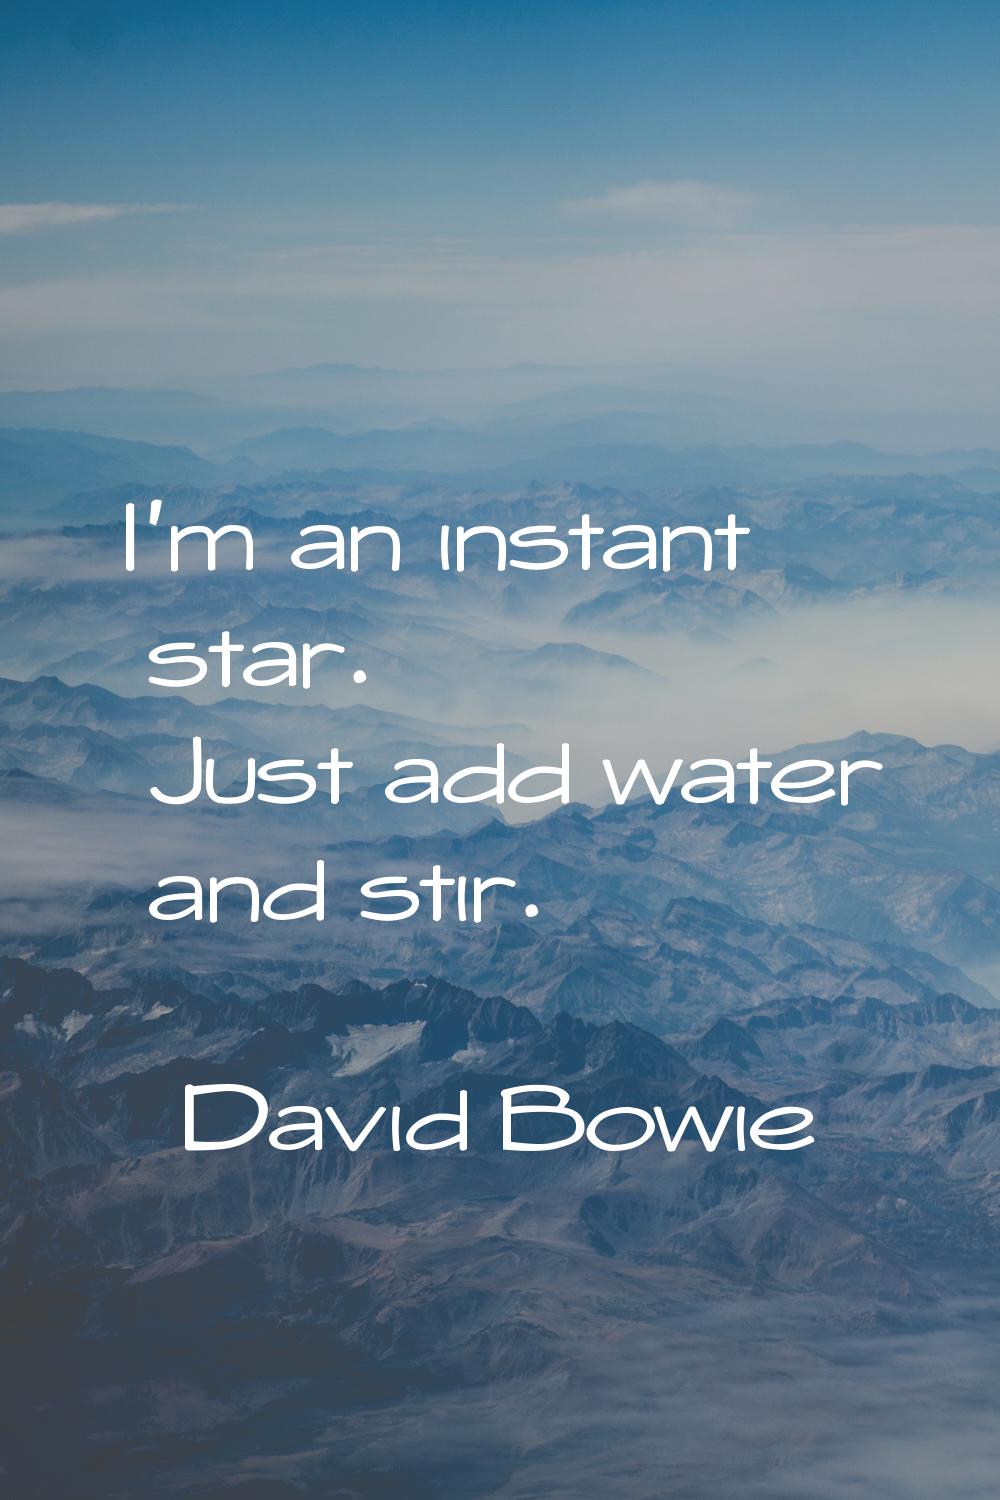 I'm an instant star. Just add water and stir.